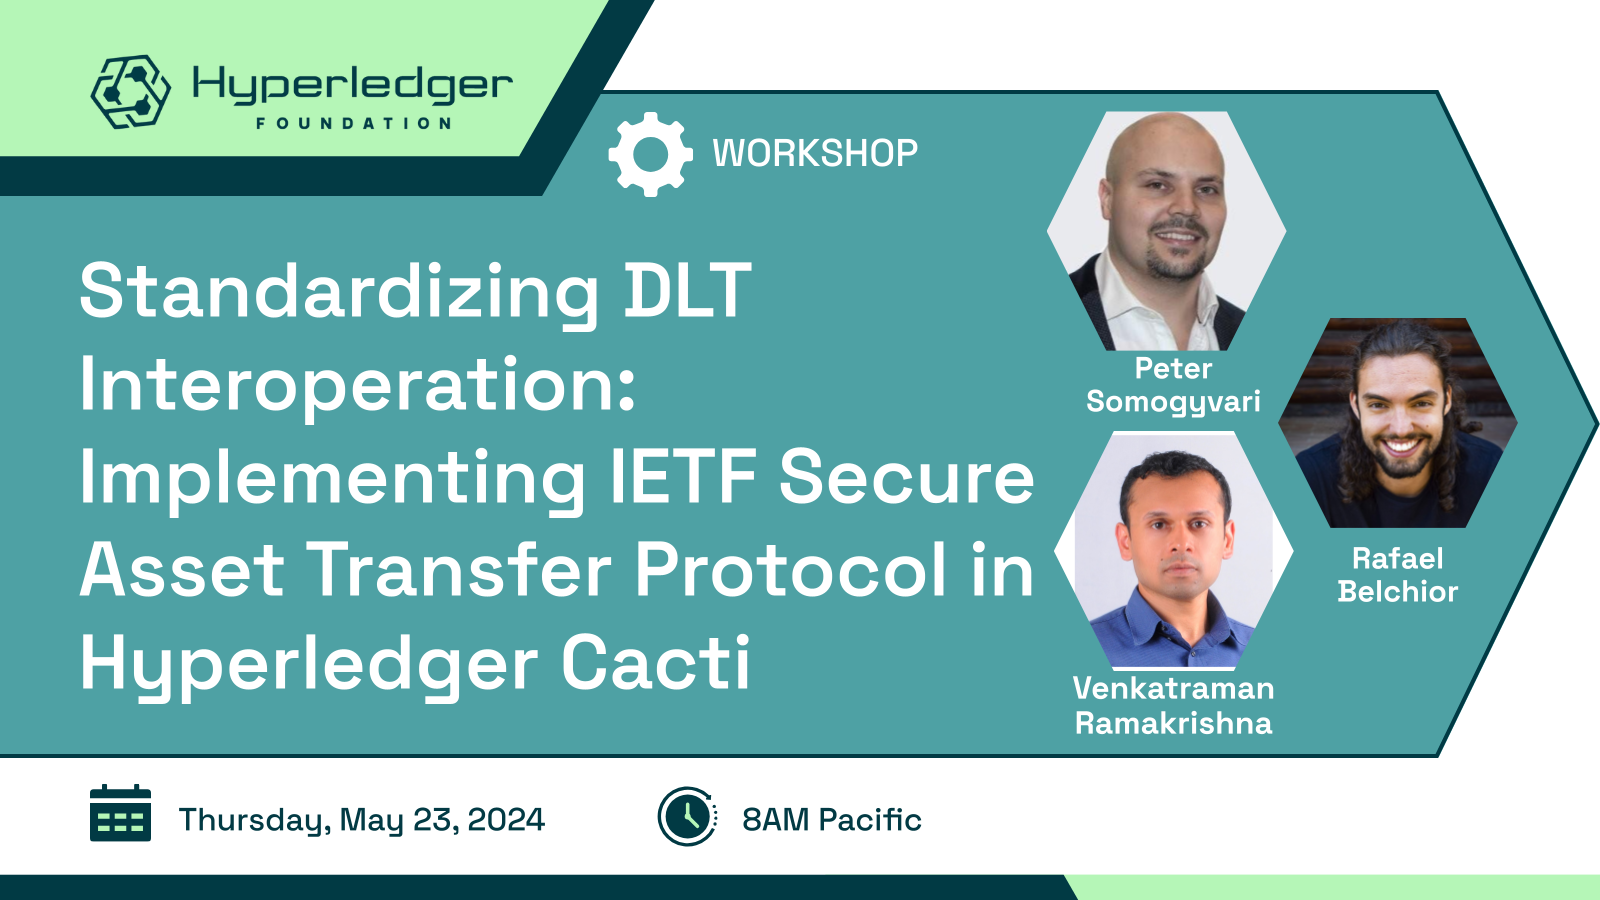 Standardizing DLT Interoperation: Implementing IETF Secure Asset Transfer Protocol in Hyperledger Cacti featured image